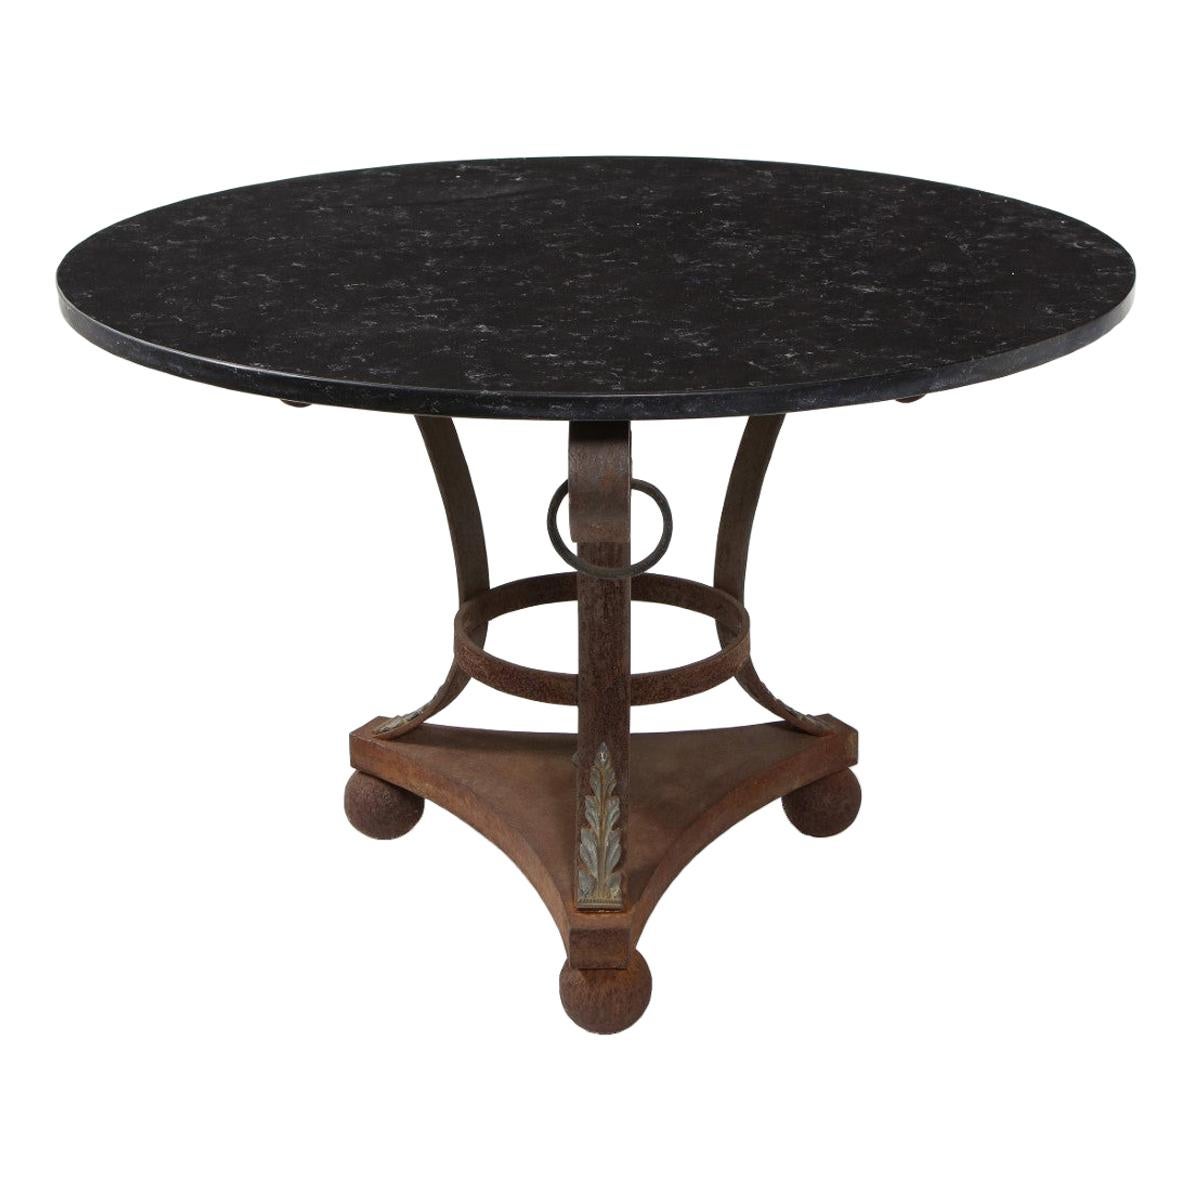 Vintage Italian Empire Style Wrought Iron Coffee Table with Black Marble Top